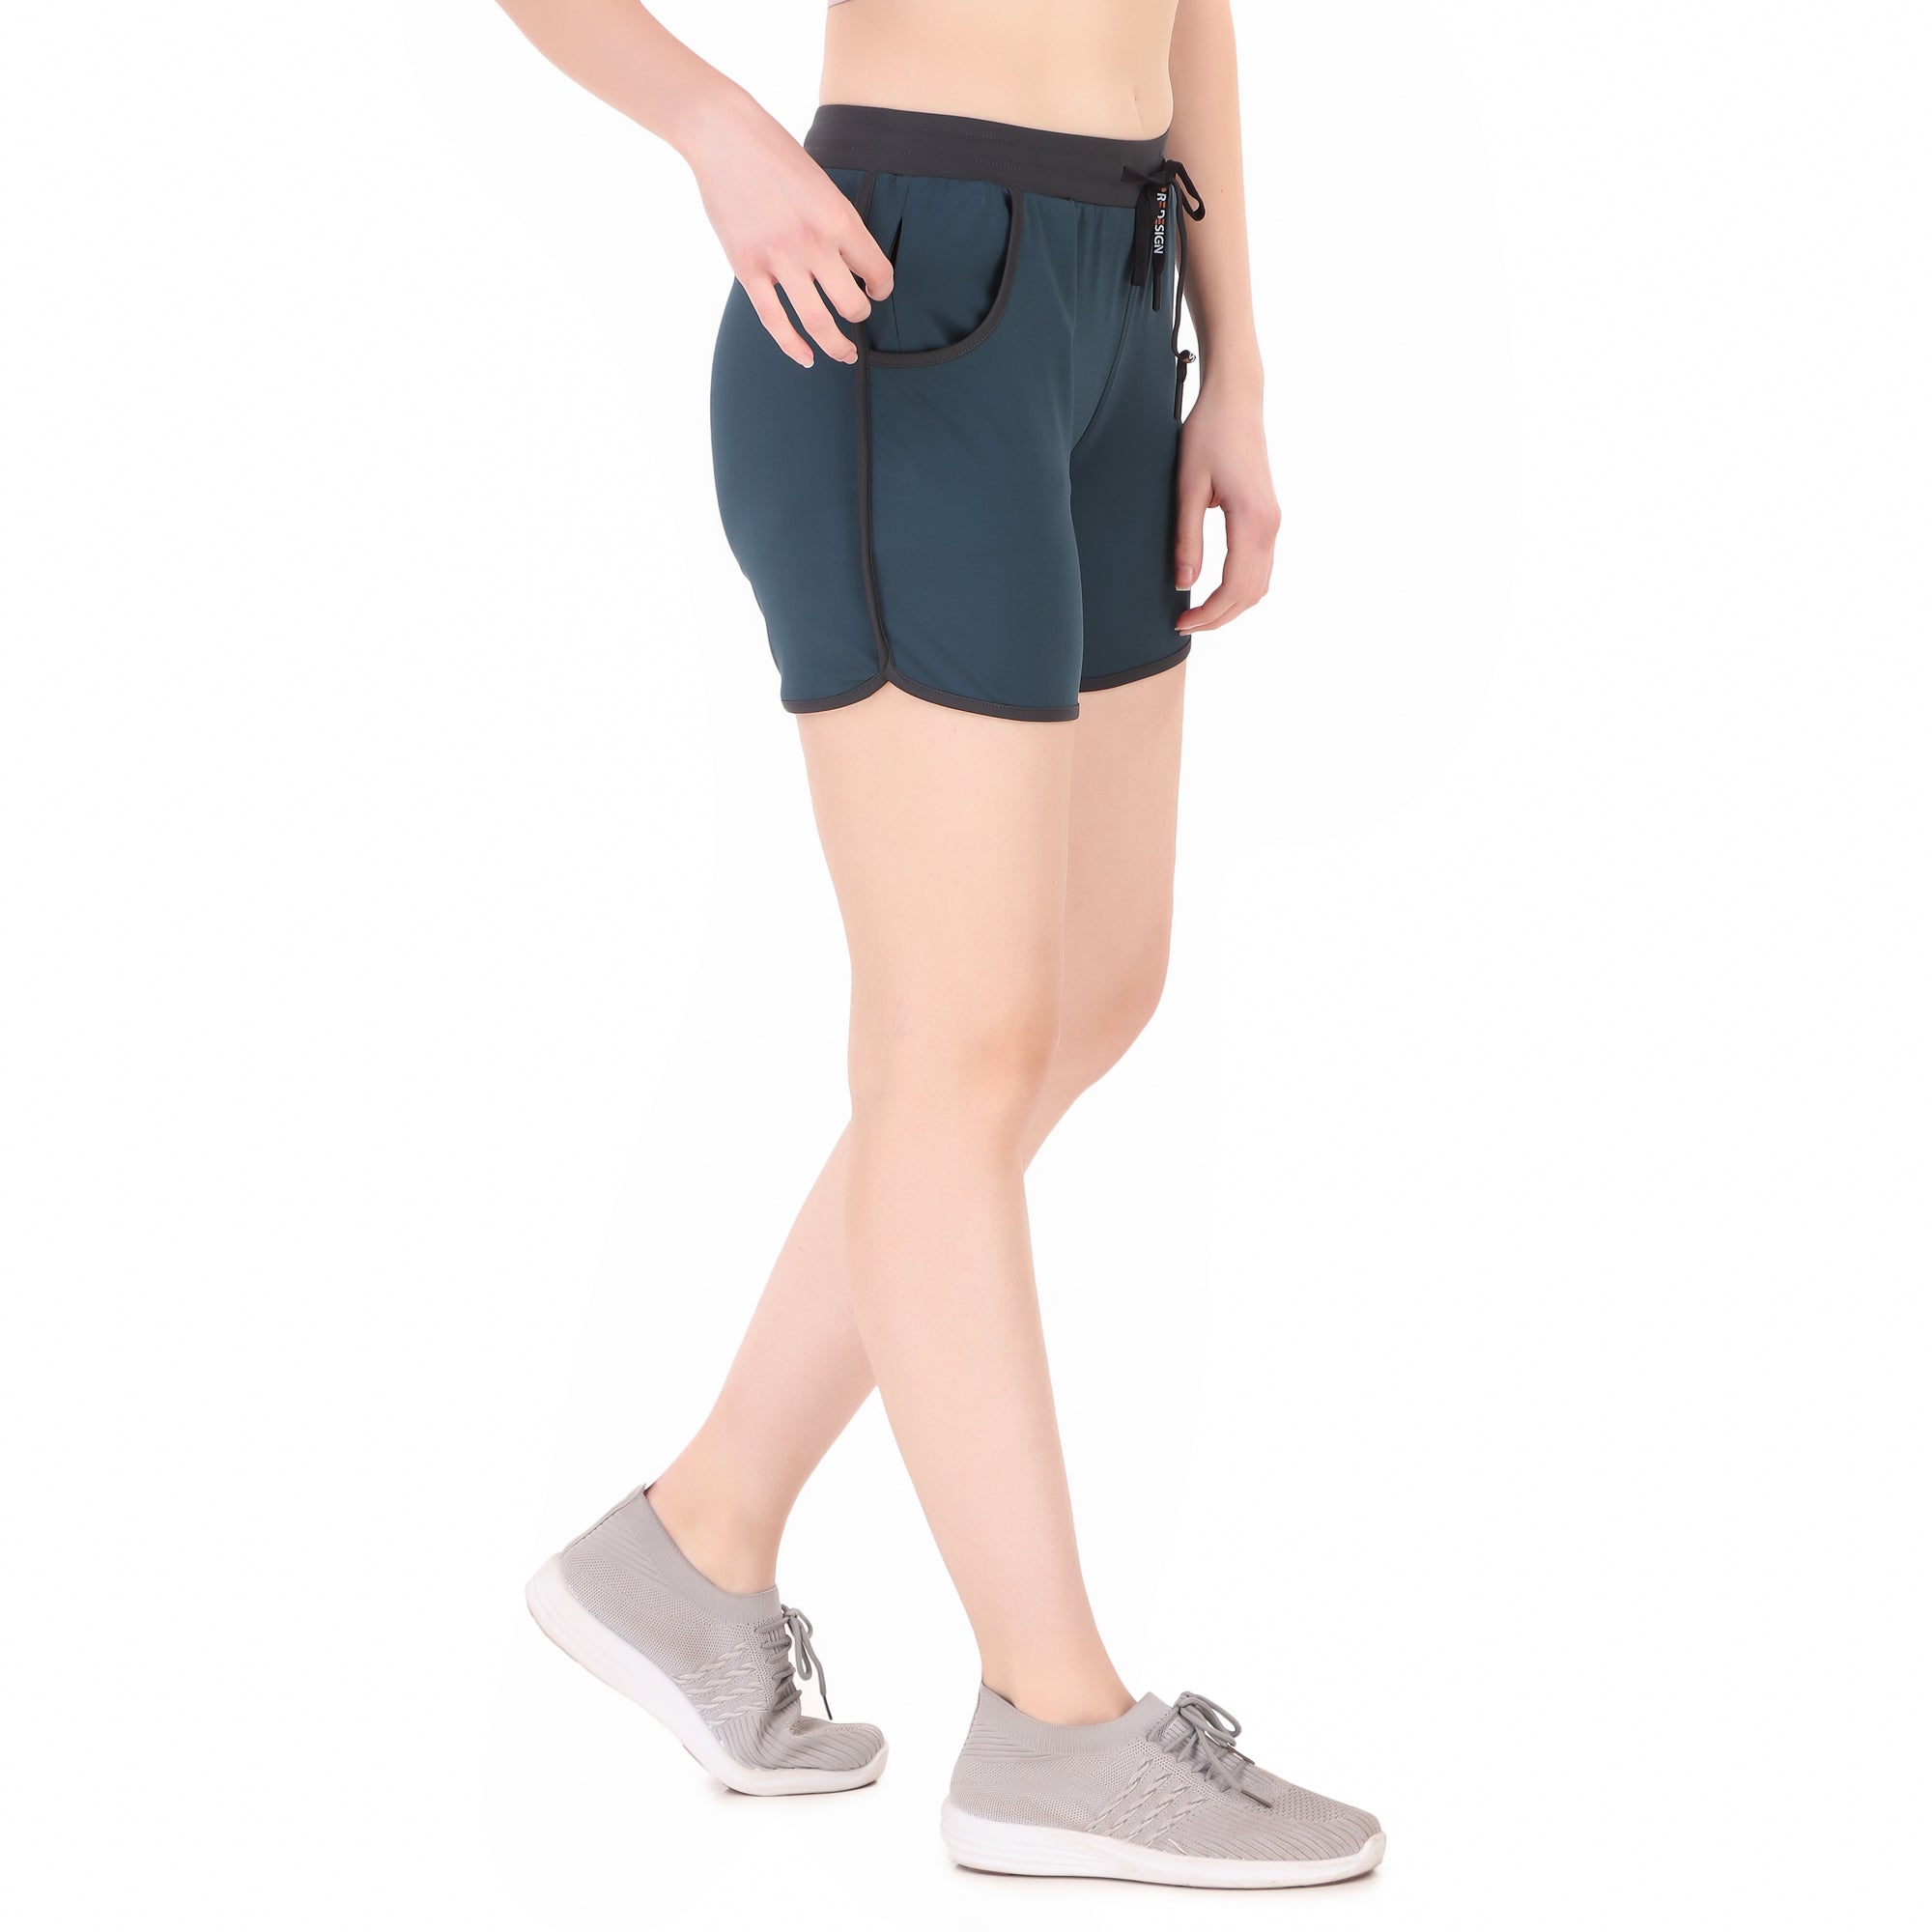 Gym & Running Shorts For Women (Teal)